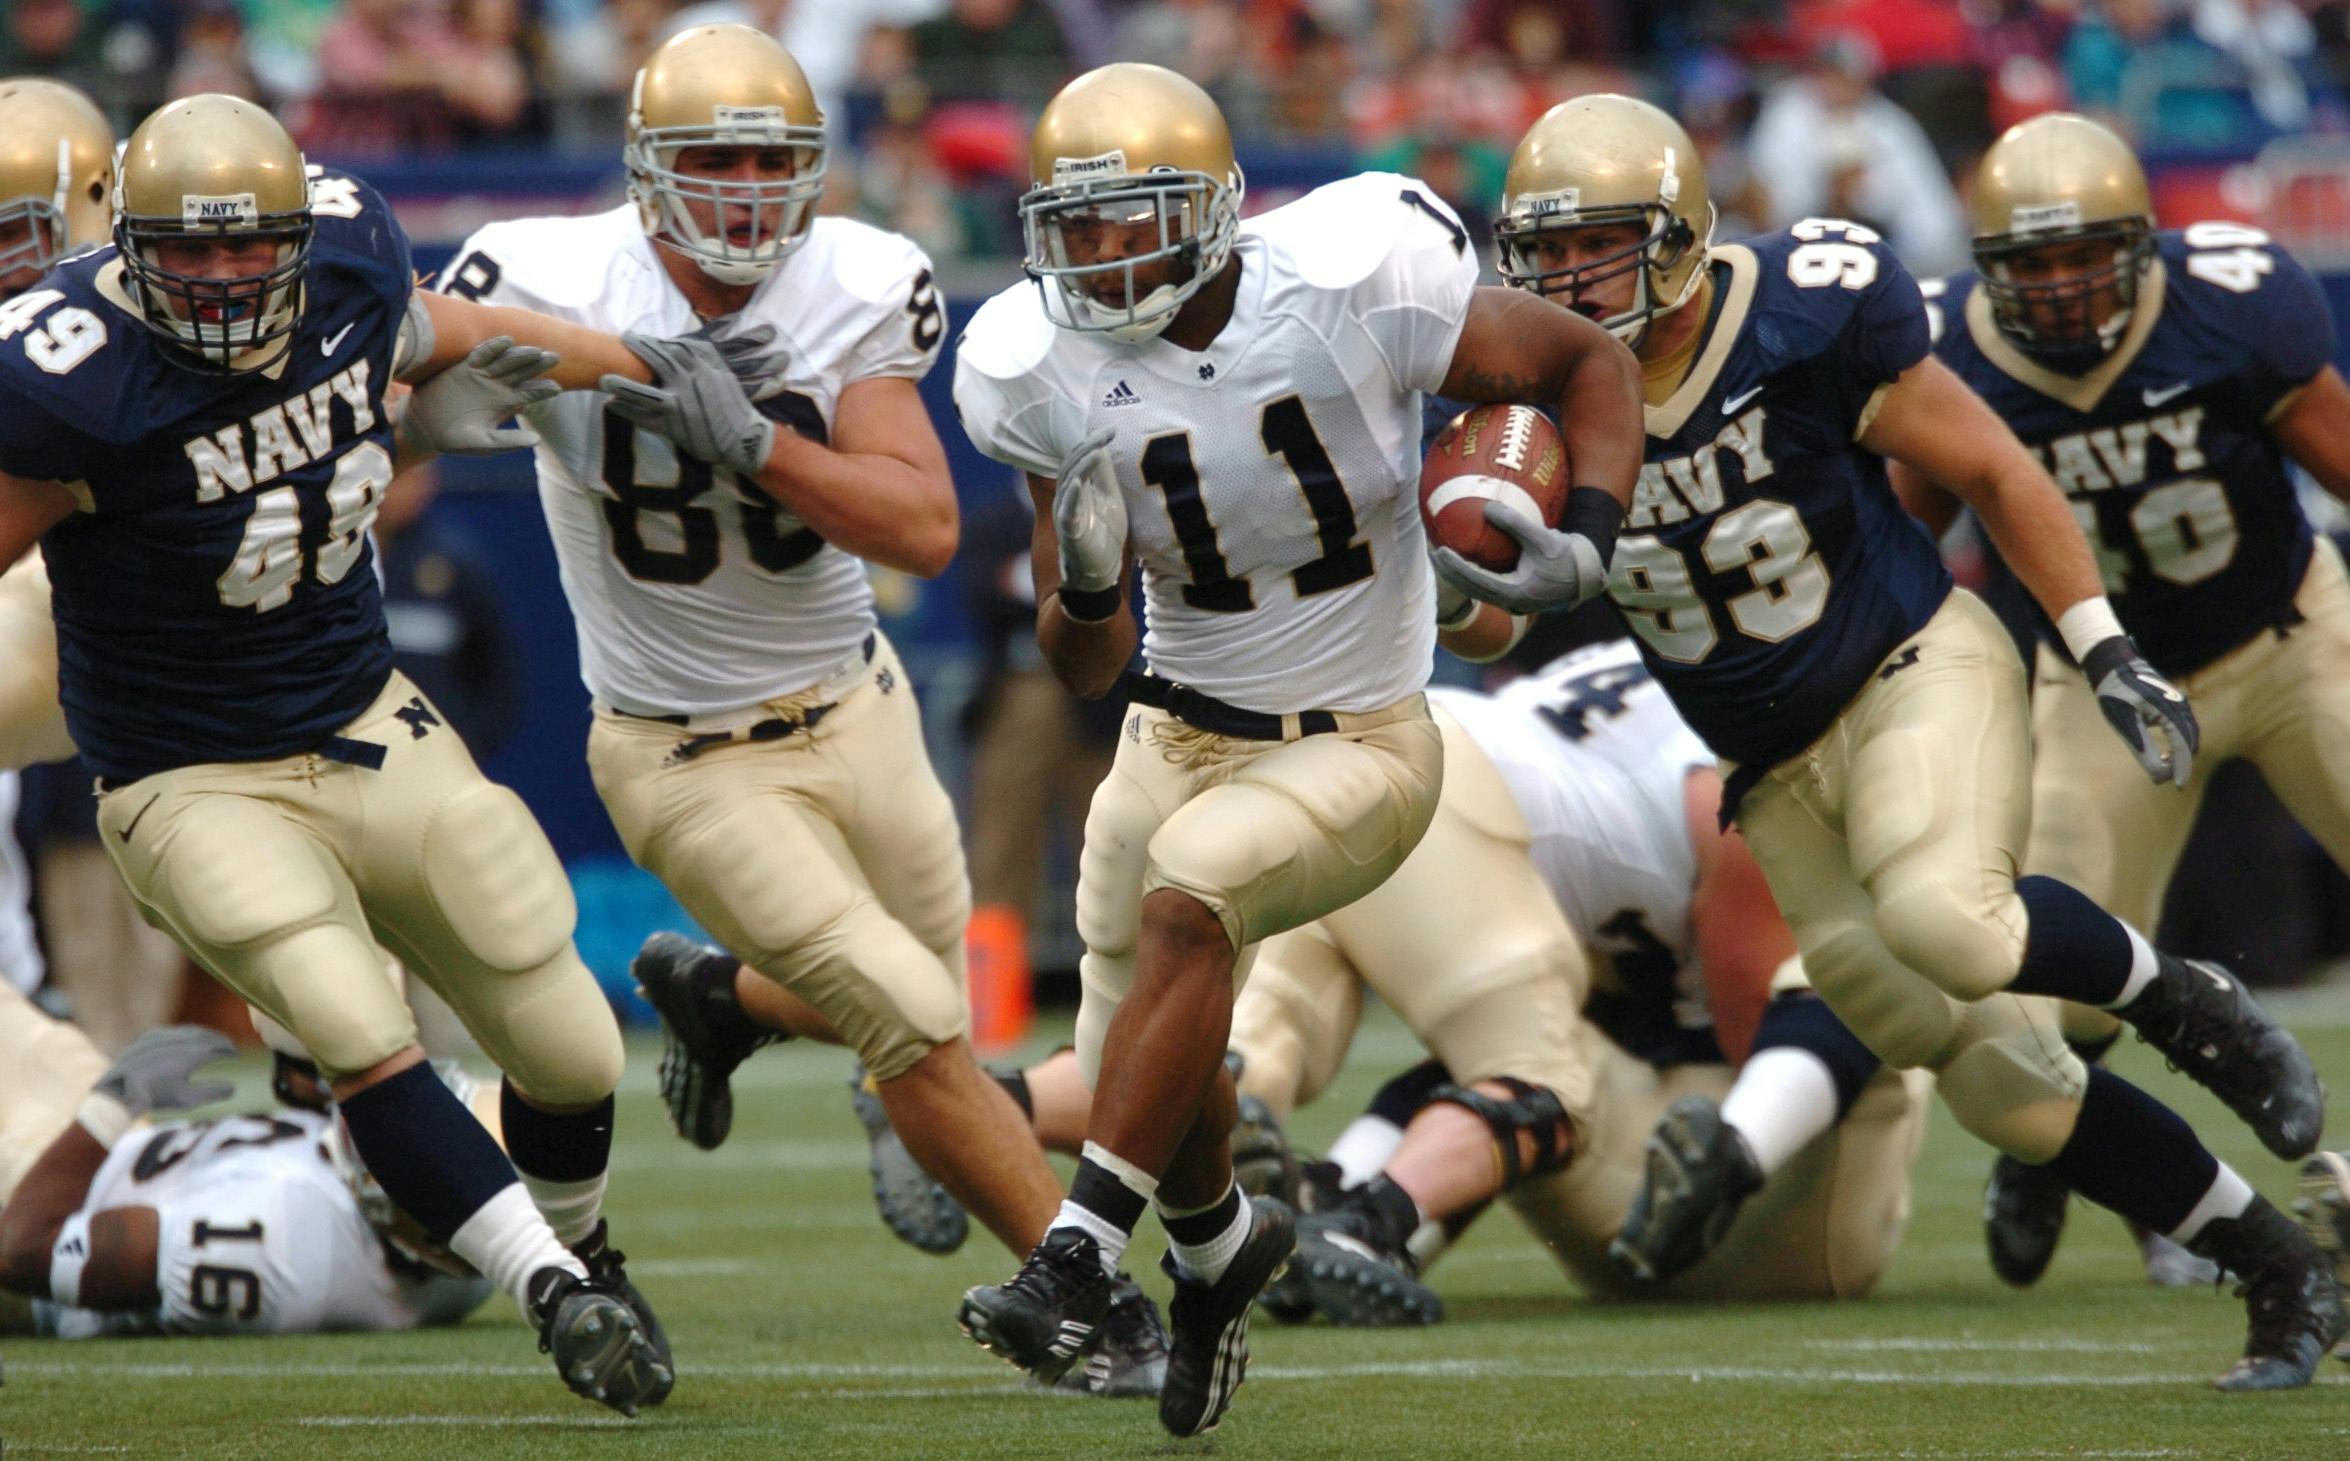 Group of Male Football Players Running on Field during Day · Free Stock